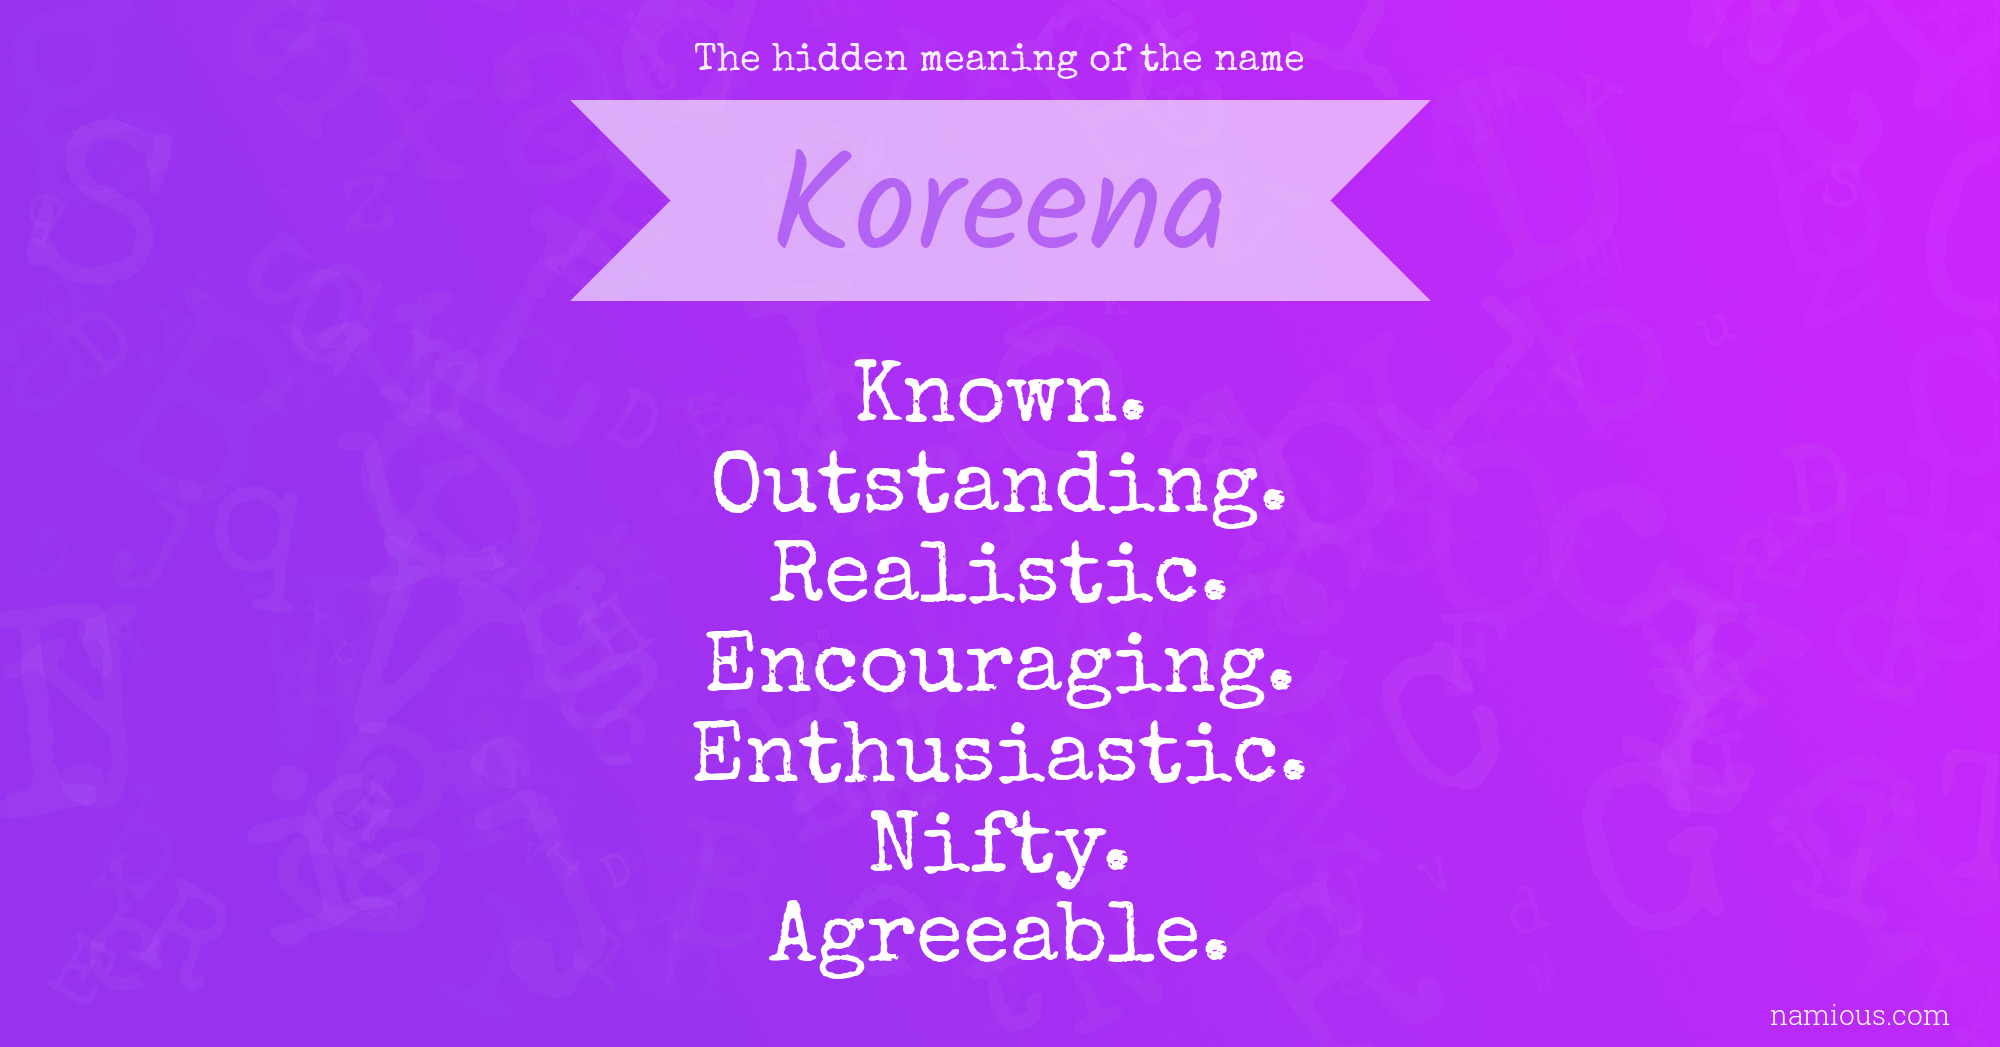 The hidden meaning of the name Koreena